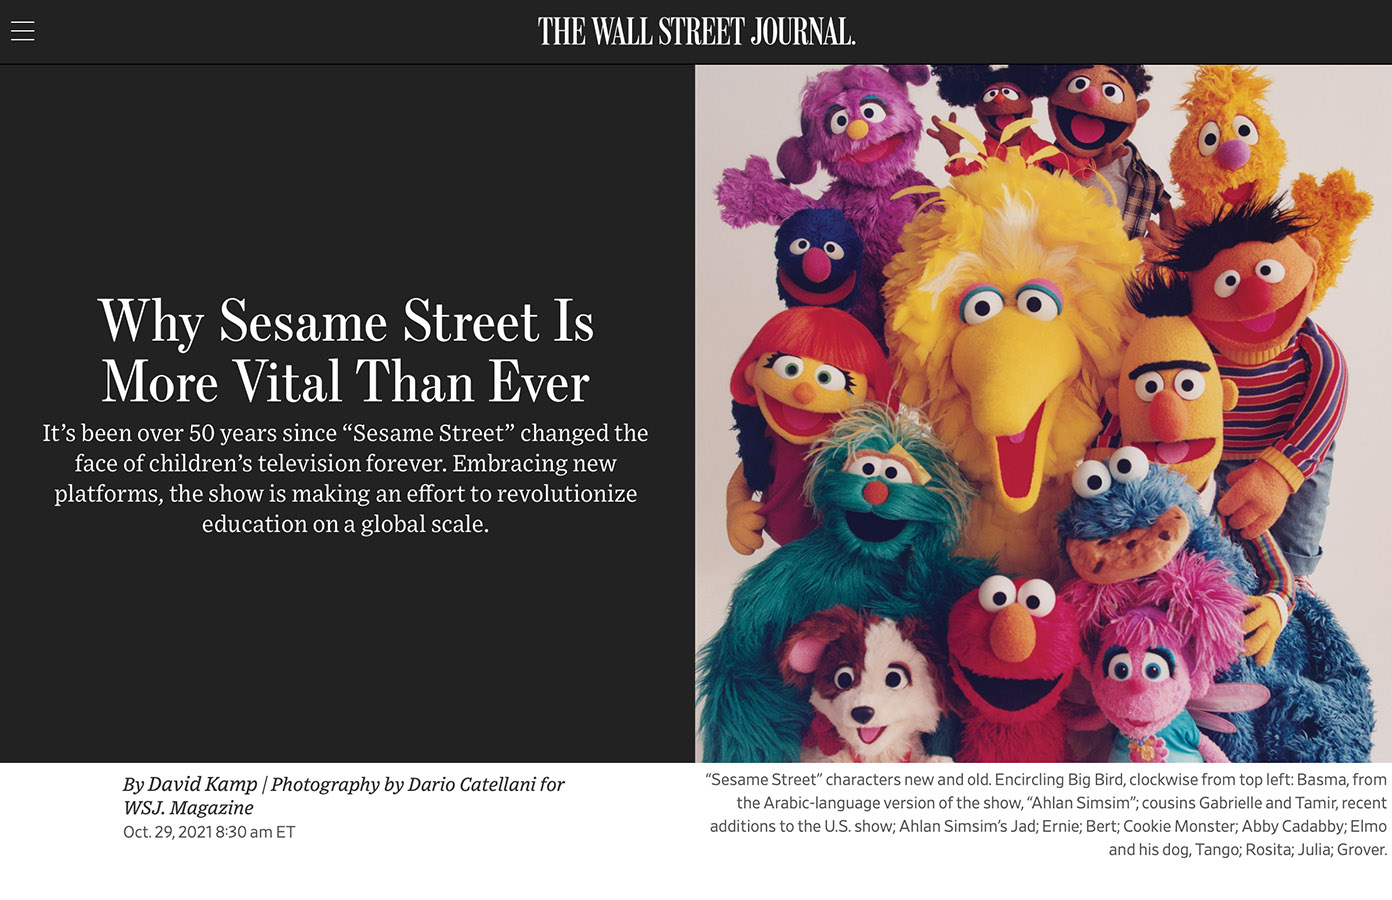 “Why Sesame Street Is More Vital Than Ever,” photographs by Dario Catellani, The Innovators Issue and October 29 at wsj.com